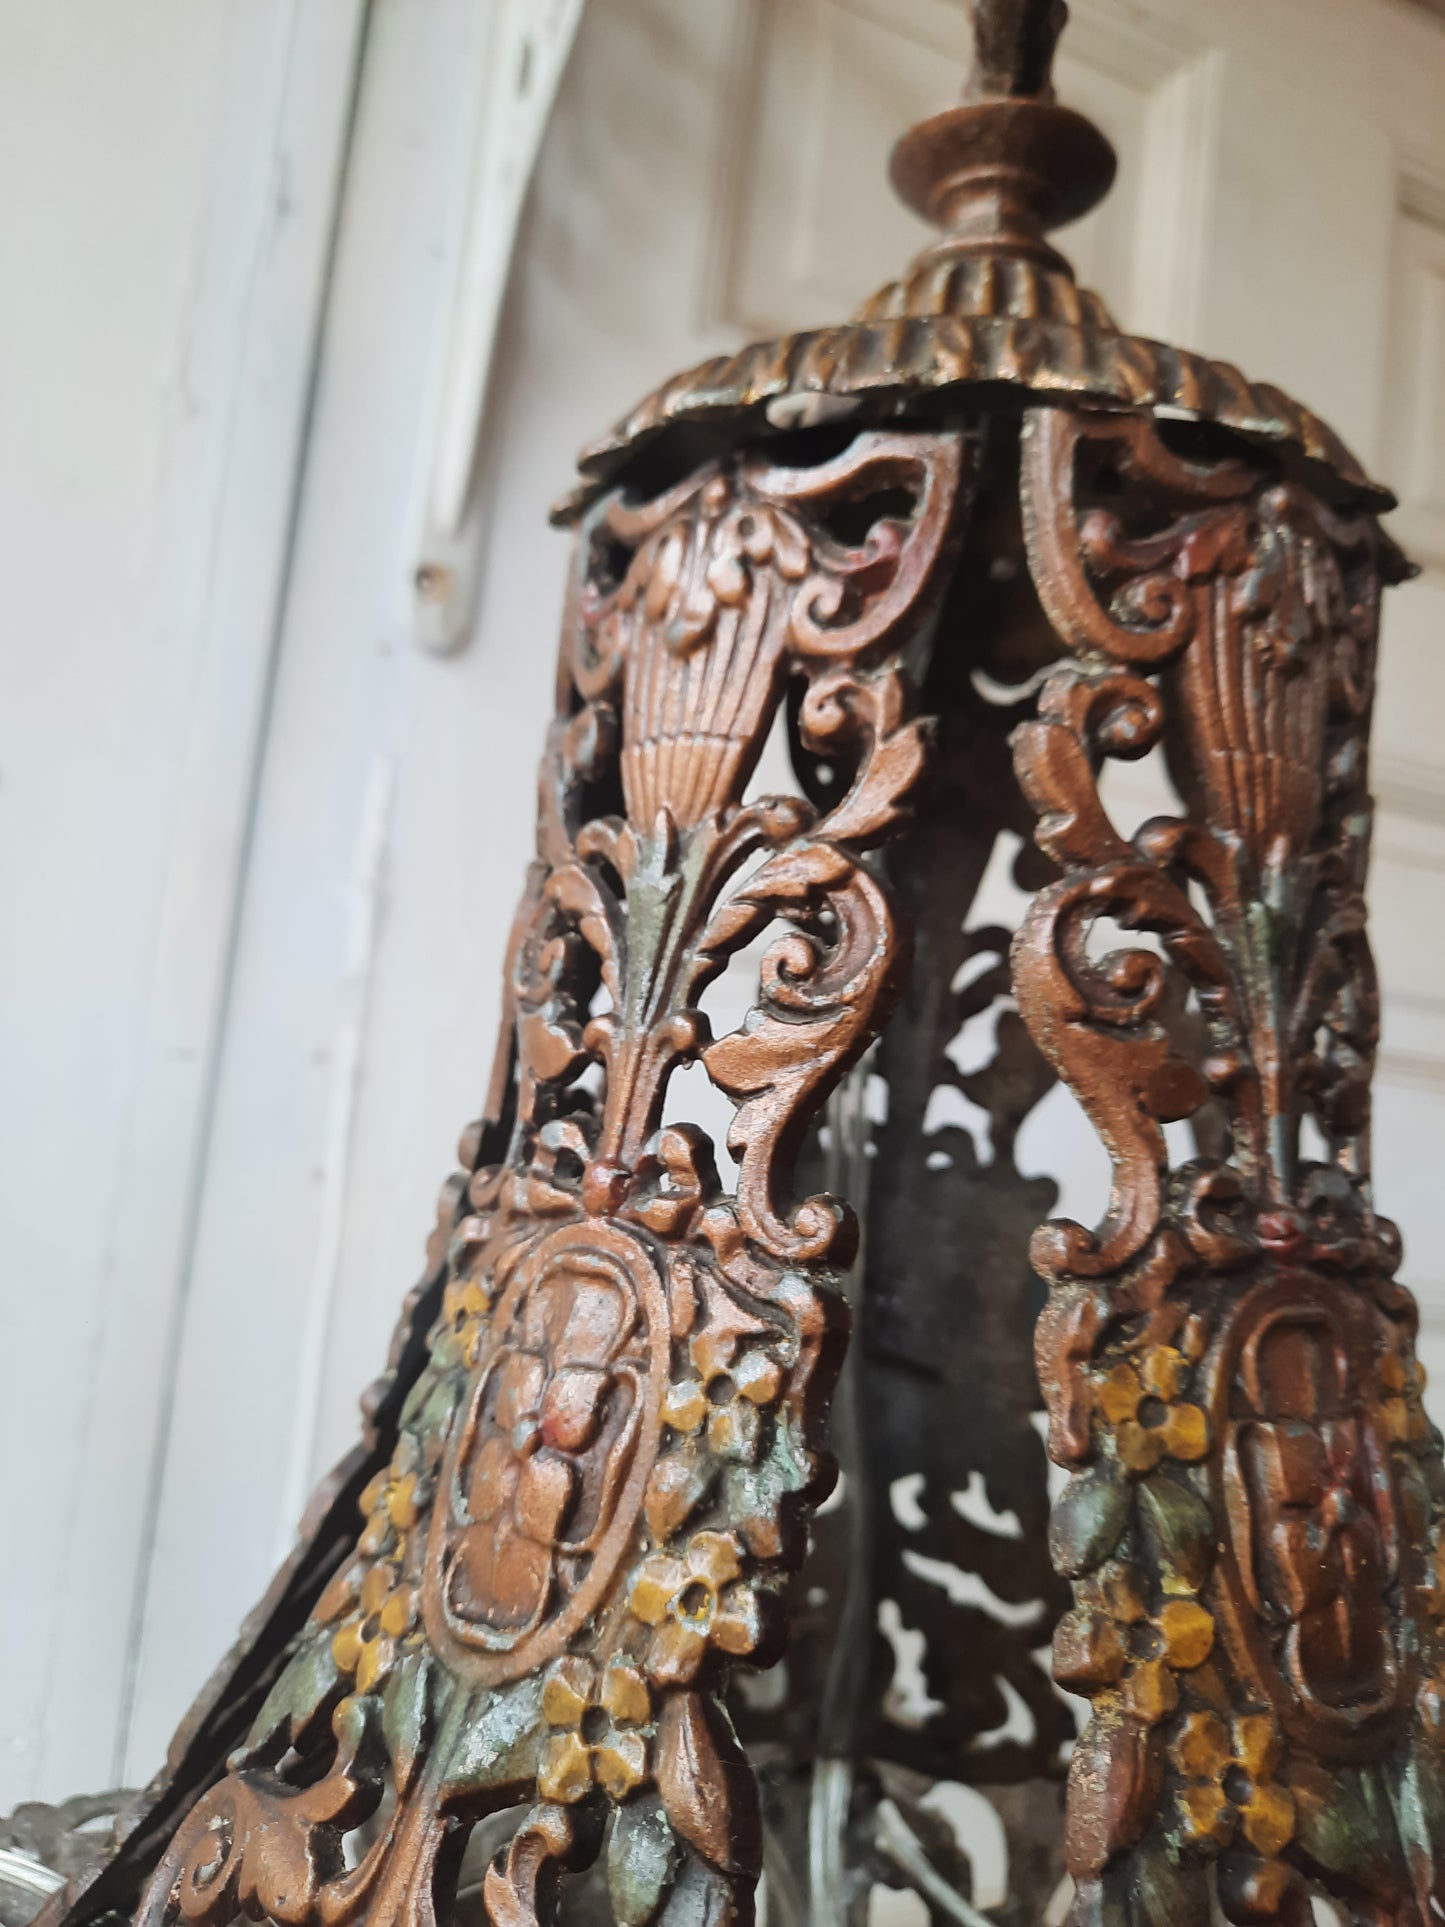 Antique Polychrome Cast Metal Chandelier with Candle Sockets, Hand Painted Fancy Floral Chandelier